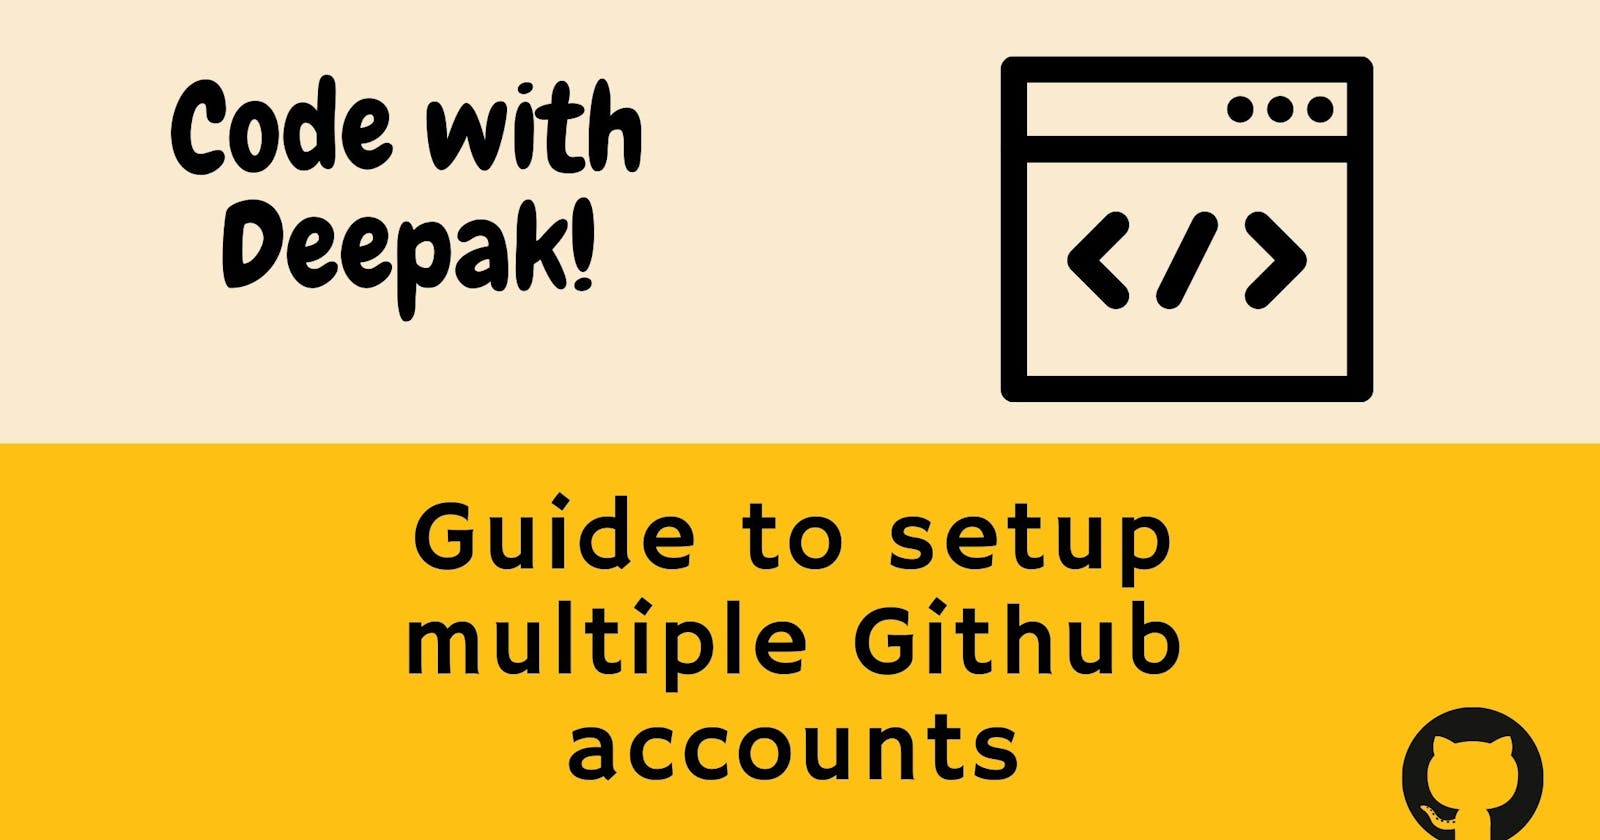 Guide to configure multiple Github accounts with SSH